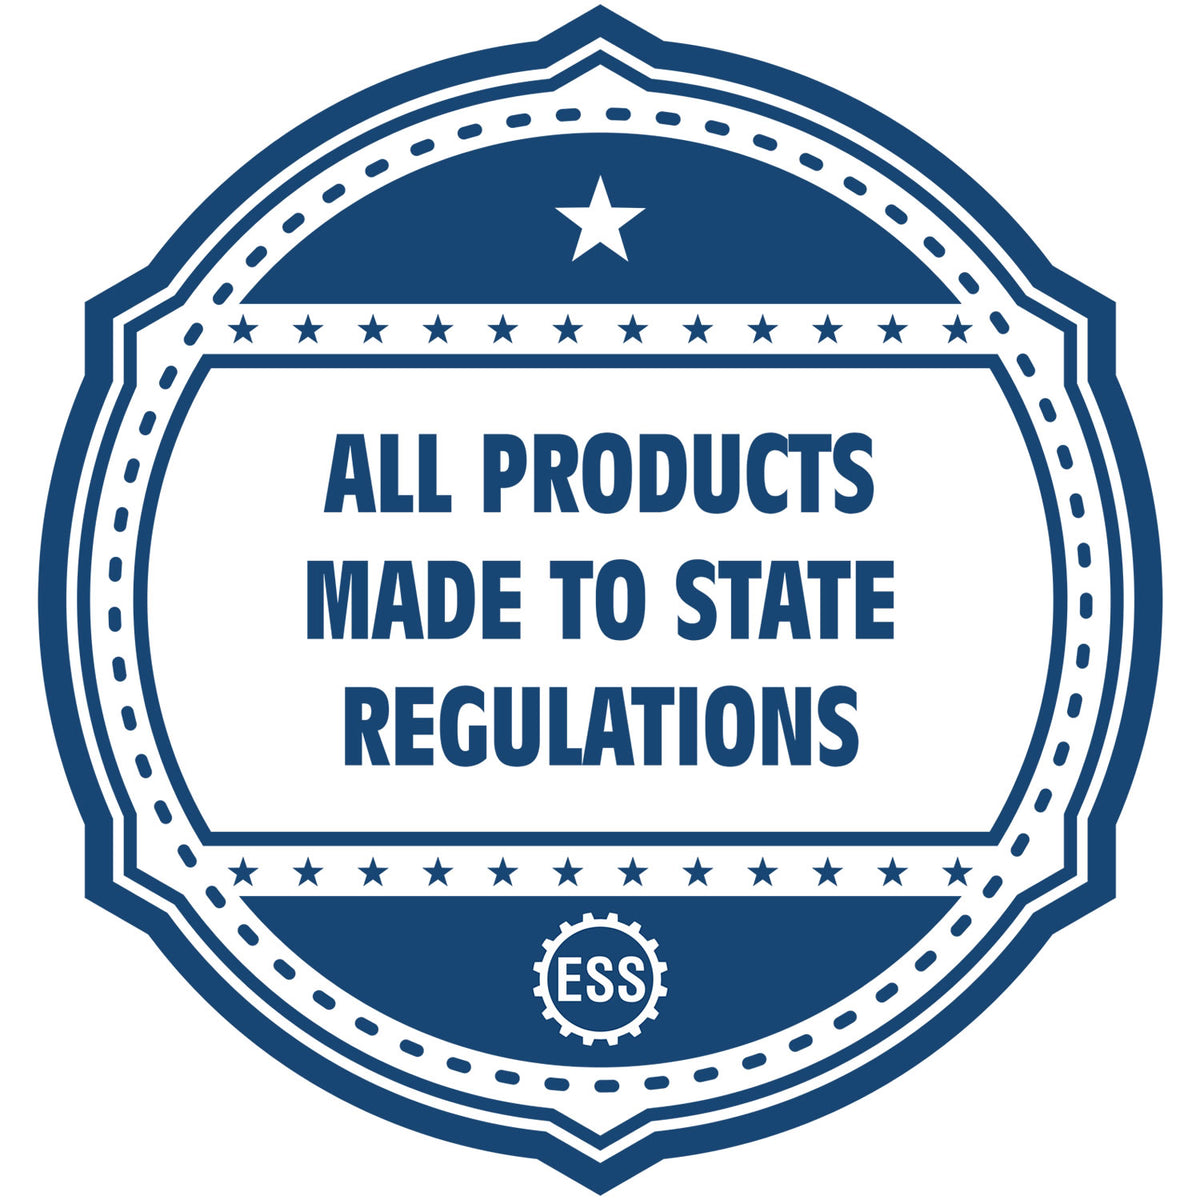 An icon or badge element for the State of Washington Long Reach Architectural Embossing Seal showing that this product is made in compliance with state regulations.